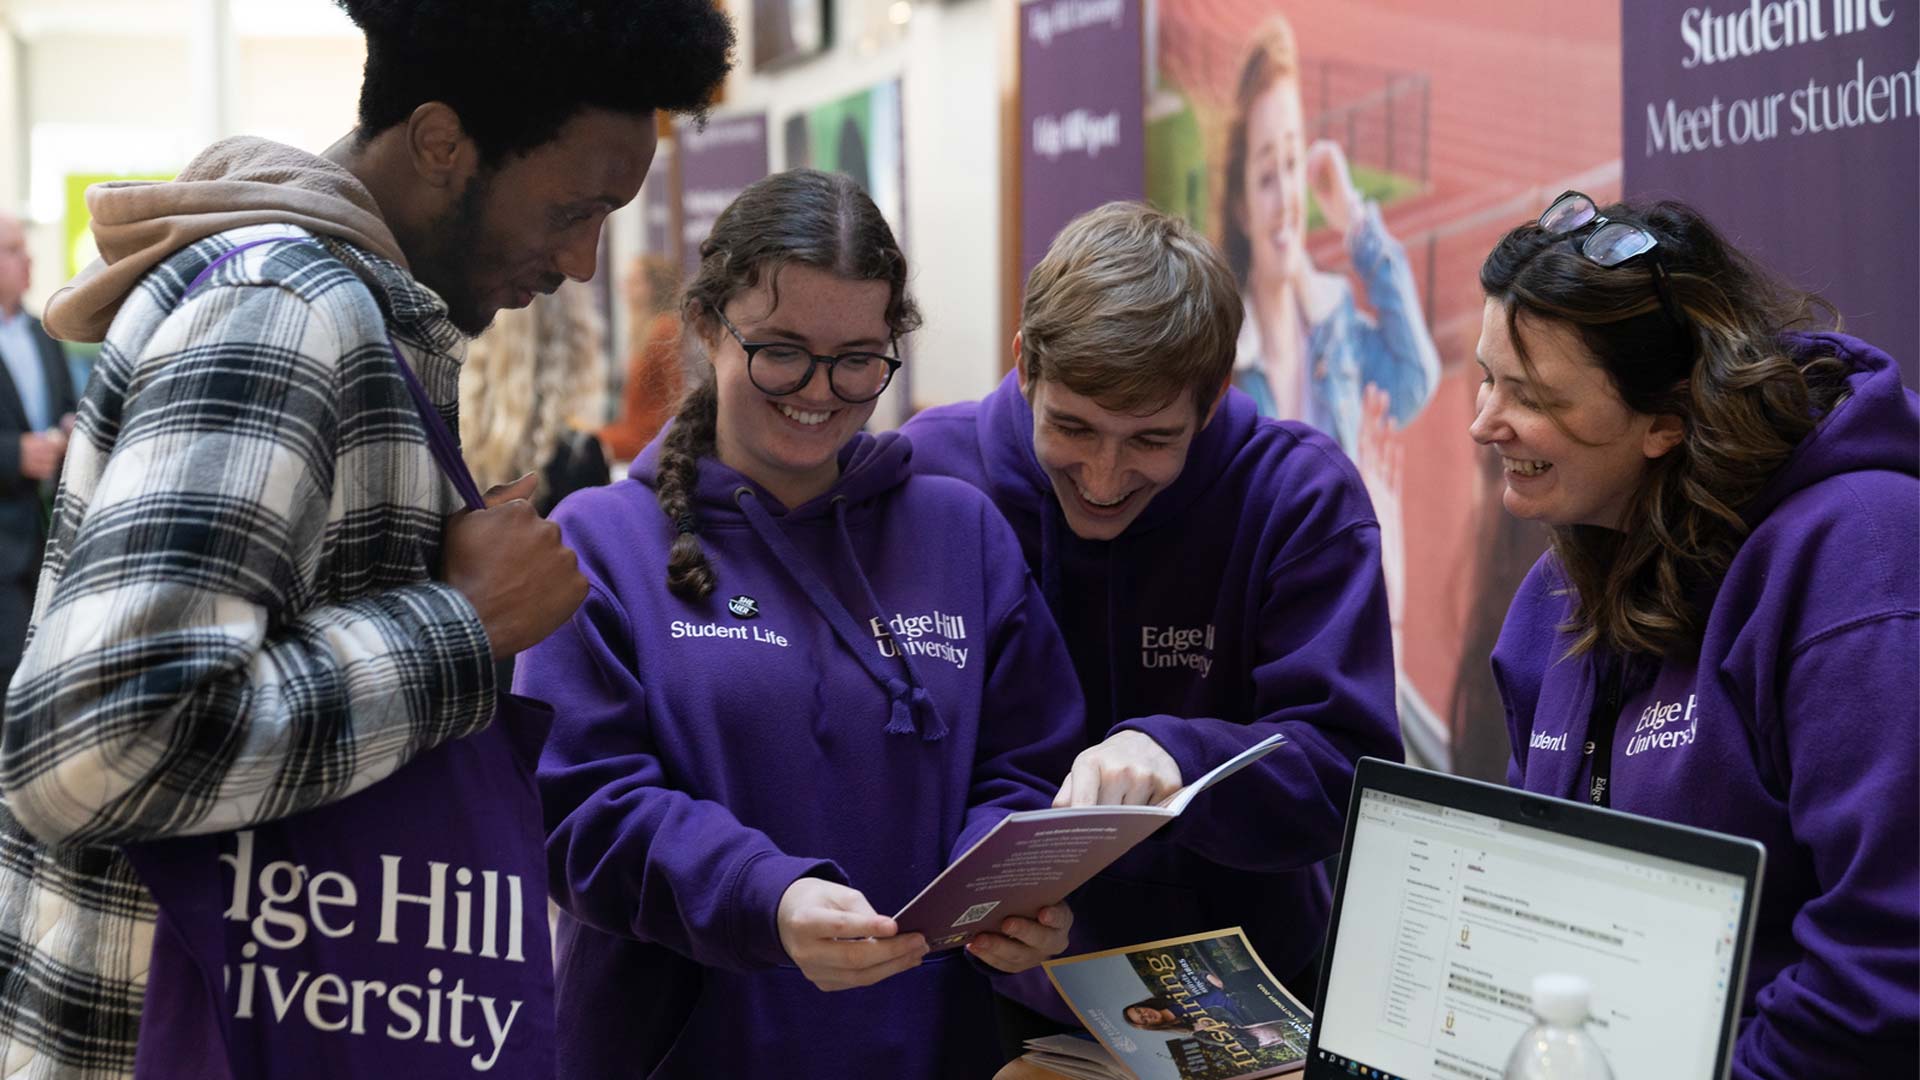 Image of visitor chatting with student guides and staff at the student experience fair during open day